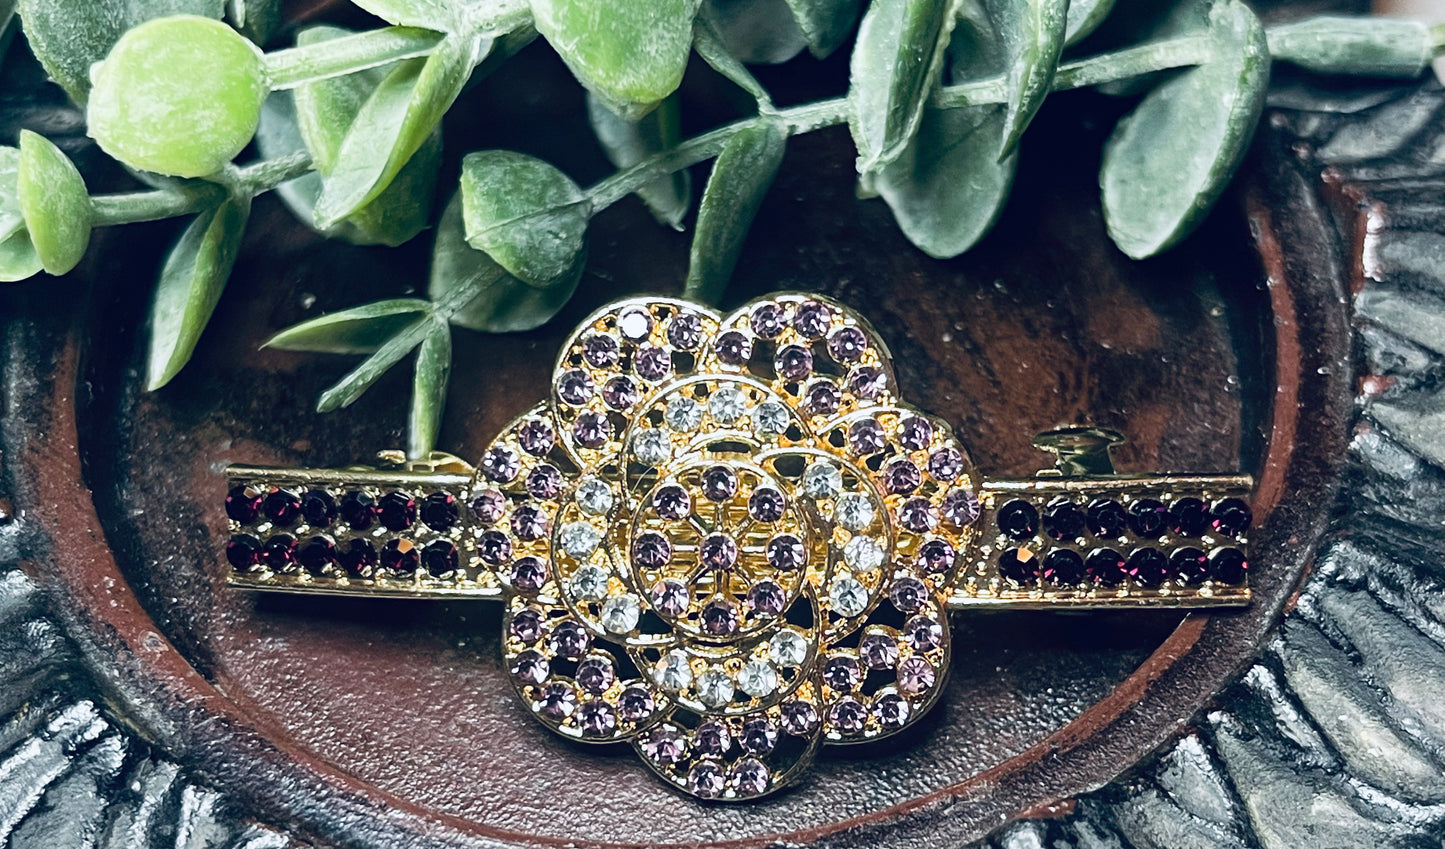 Purple flower Crystal rhinestone barrette approximately 3.0” gold tone formal hair accessories gift wedding bridesmaid prom birthday mother of bride groom